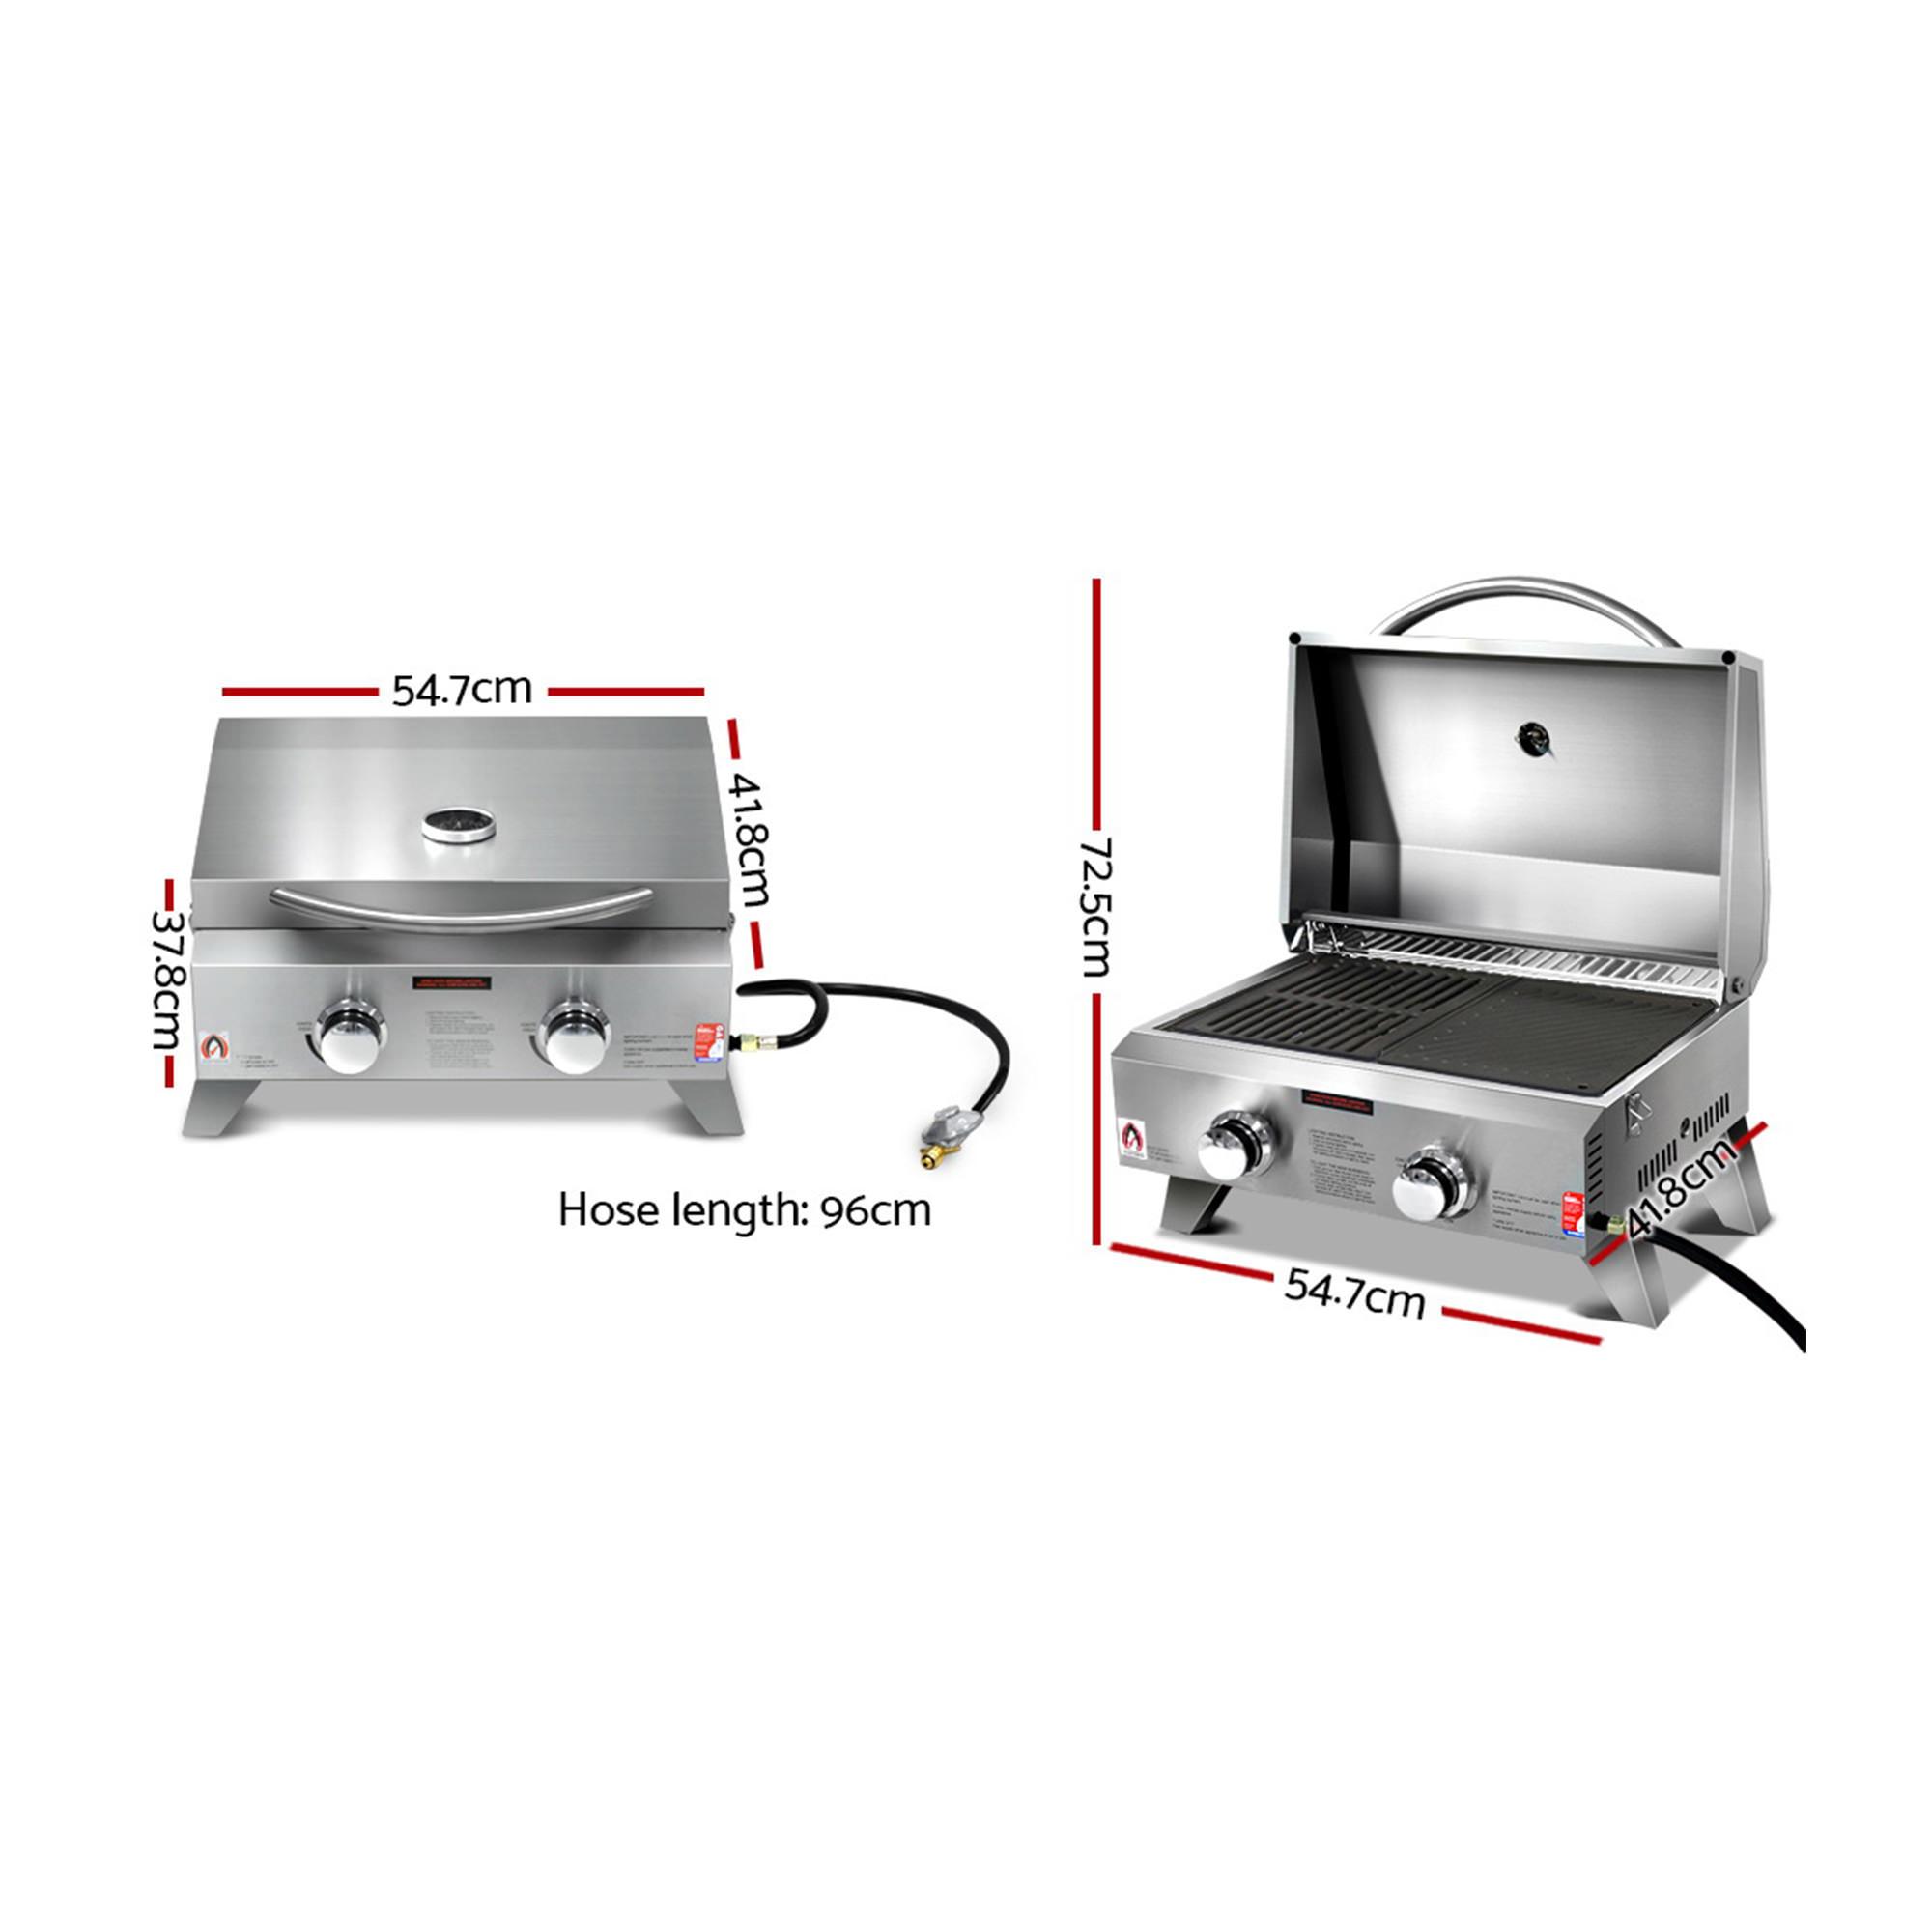 Grillz Gas Camping BBQ with Double Sided Grill Plate 60cm Image 3